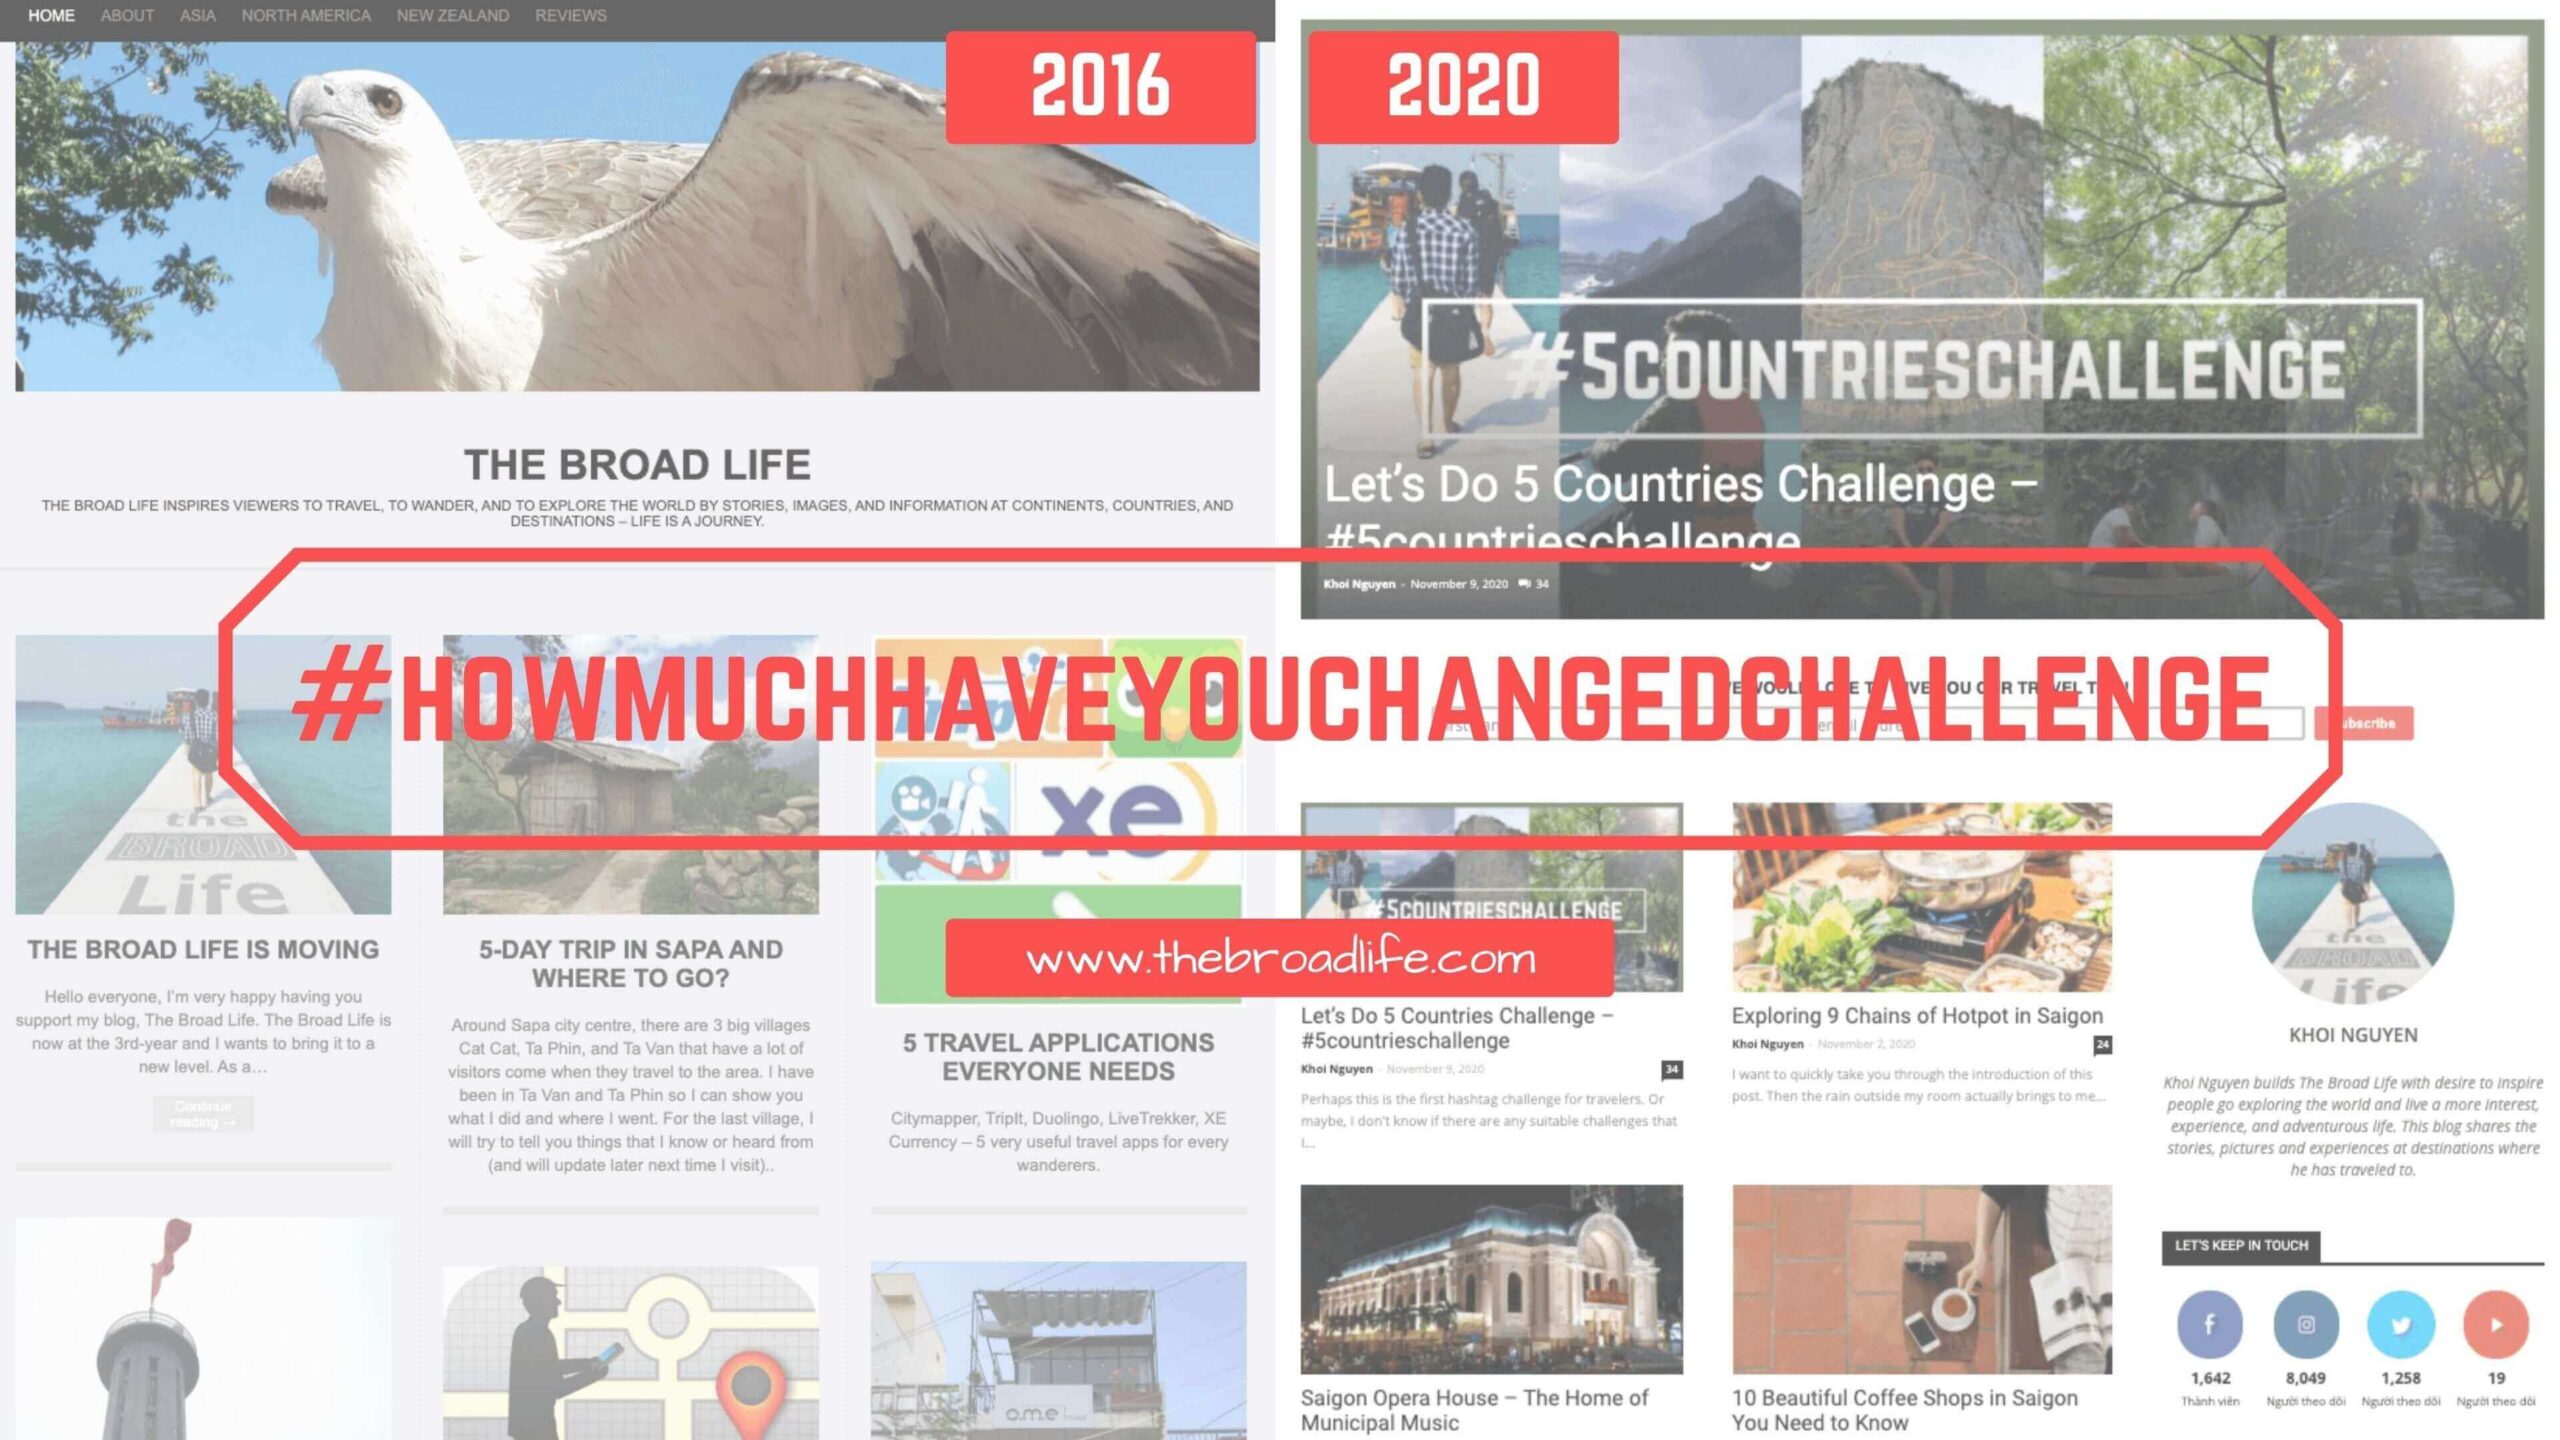 How much have you changed challenge